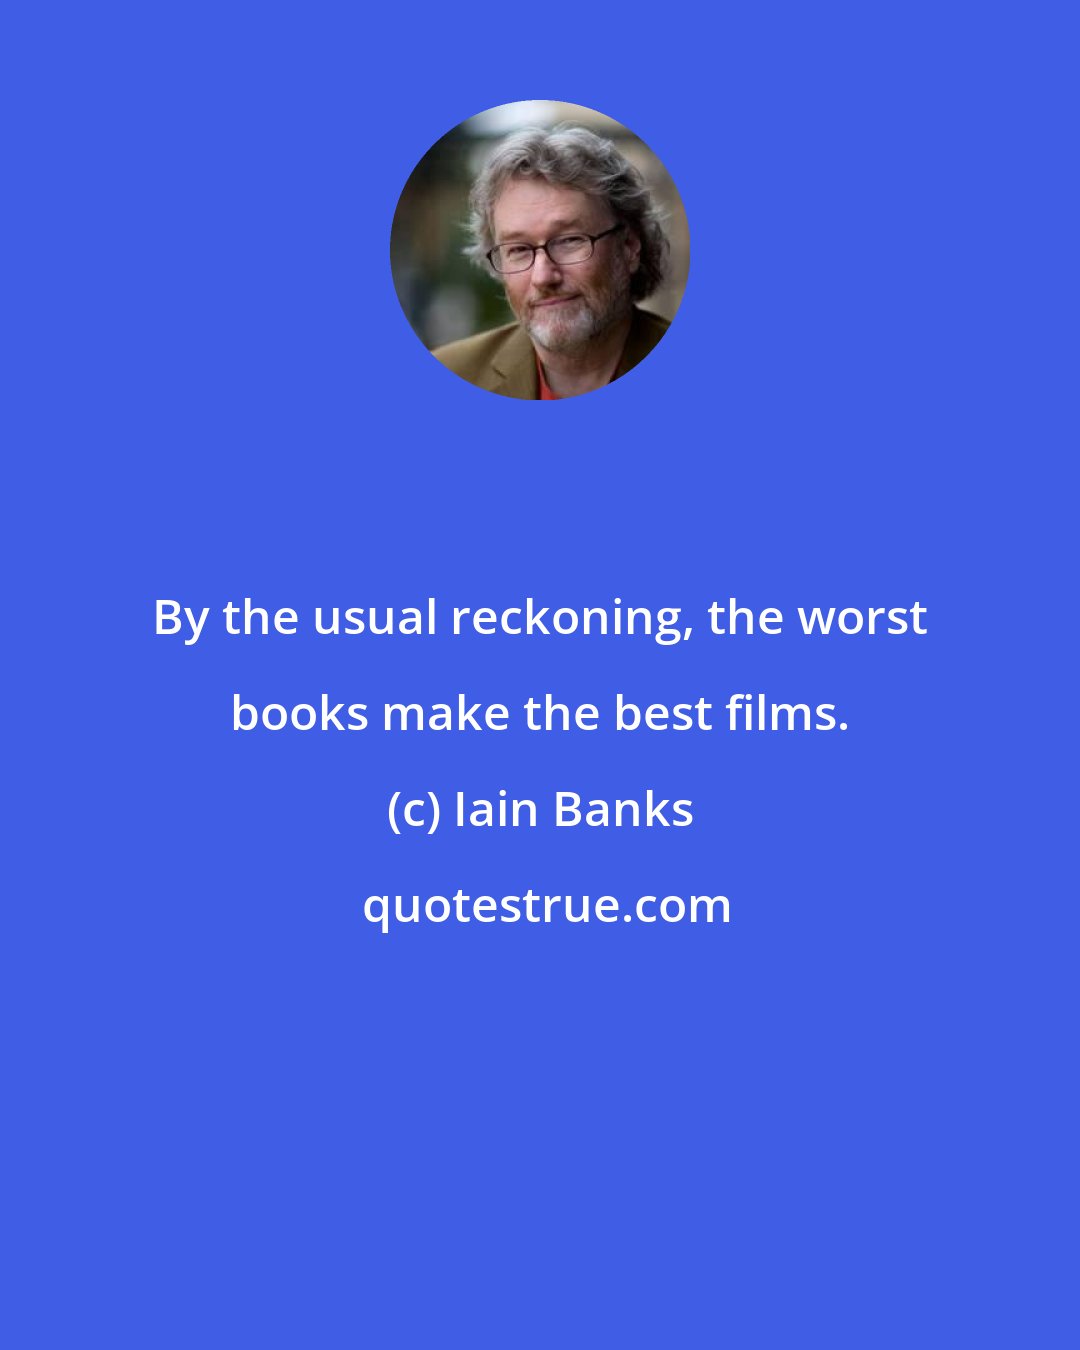 Iain Banks: By the usual reckoning, the worst books make the best films.